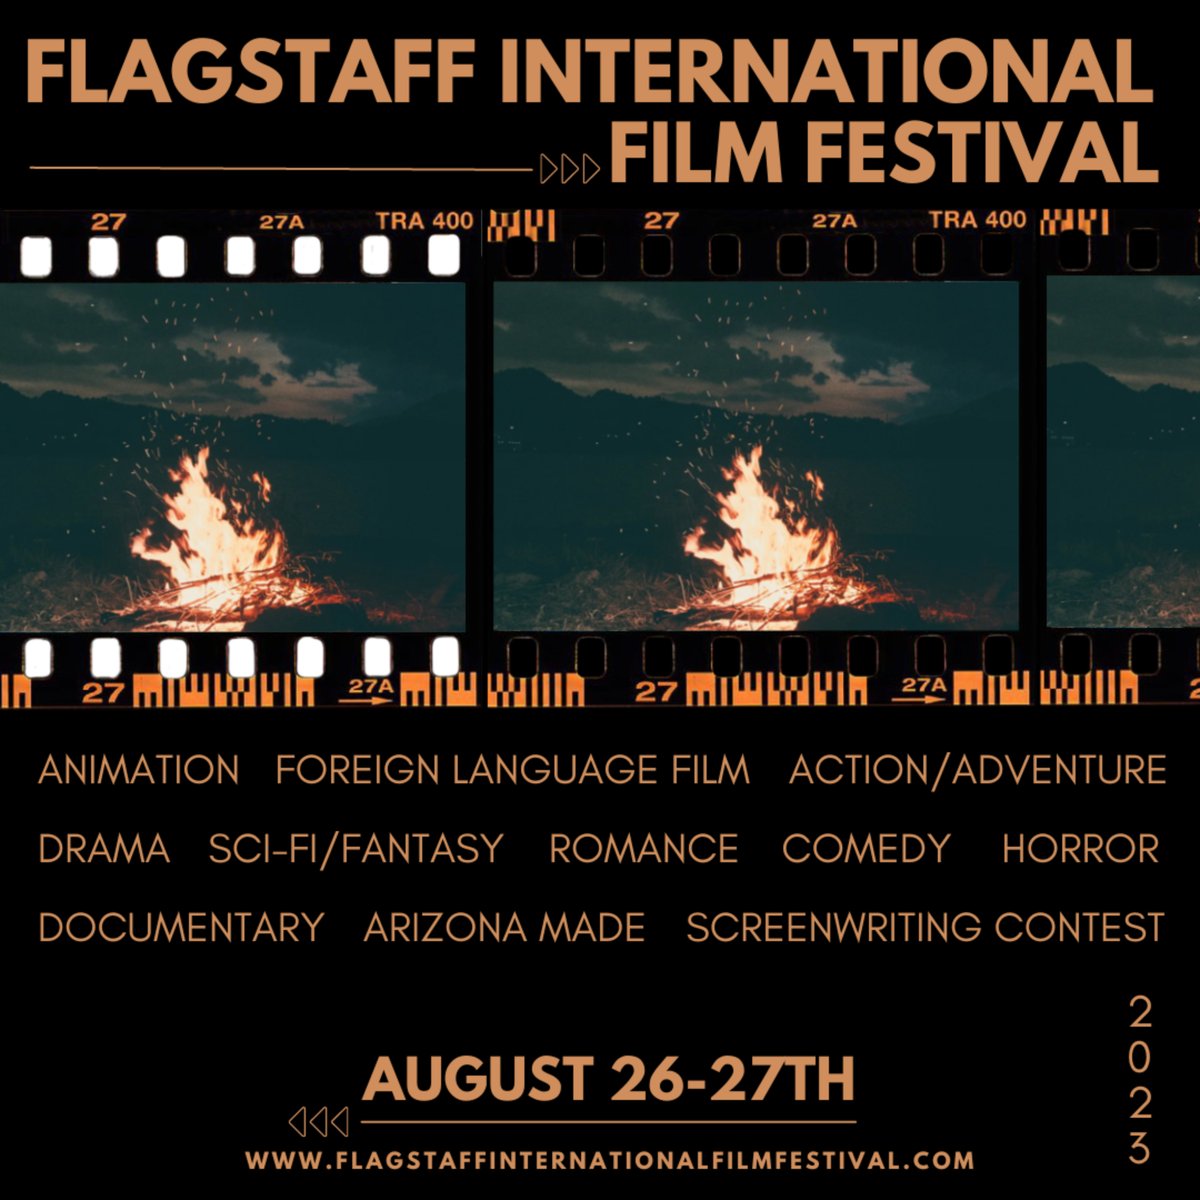 Immerse yourself in the richness of cultures, stories, and emotions, as we showcase the power of cinema at the 1st Annual Flagstaff International Film Festival, August 26-27, at the Orpheum Theater! 🎞️ #DiscoverFlagstaff #FlagstaffInternationalFilmFest #FilmFestival